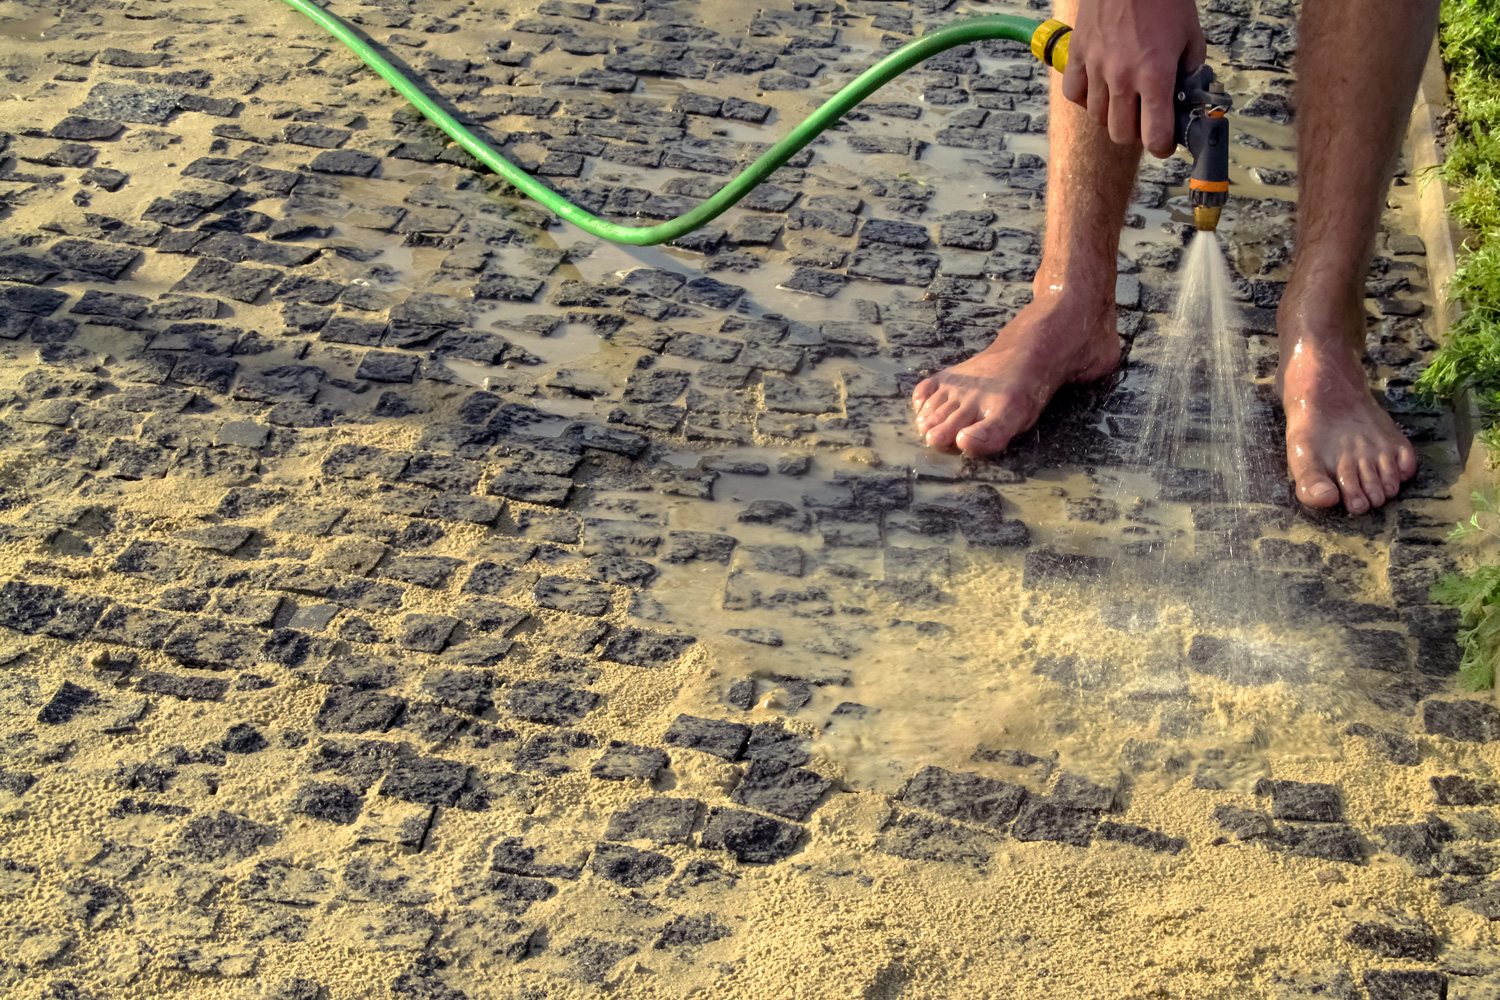 A man washes his bare feet from a watering hose, standing on a sandy paving stone, in the summer outdoors 